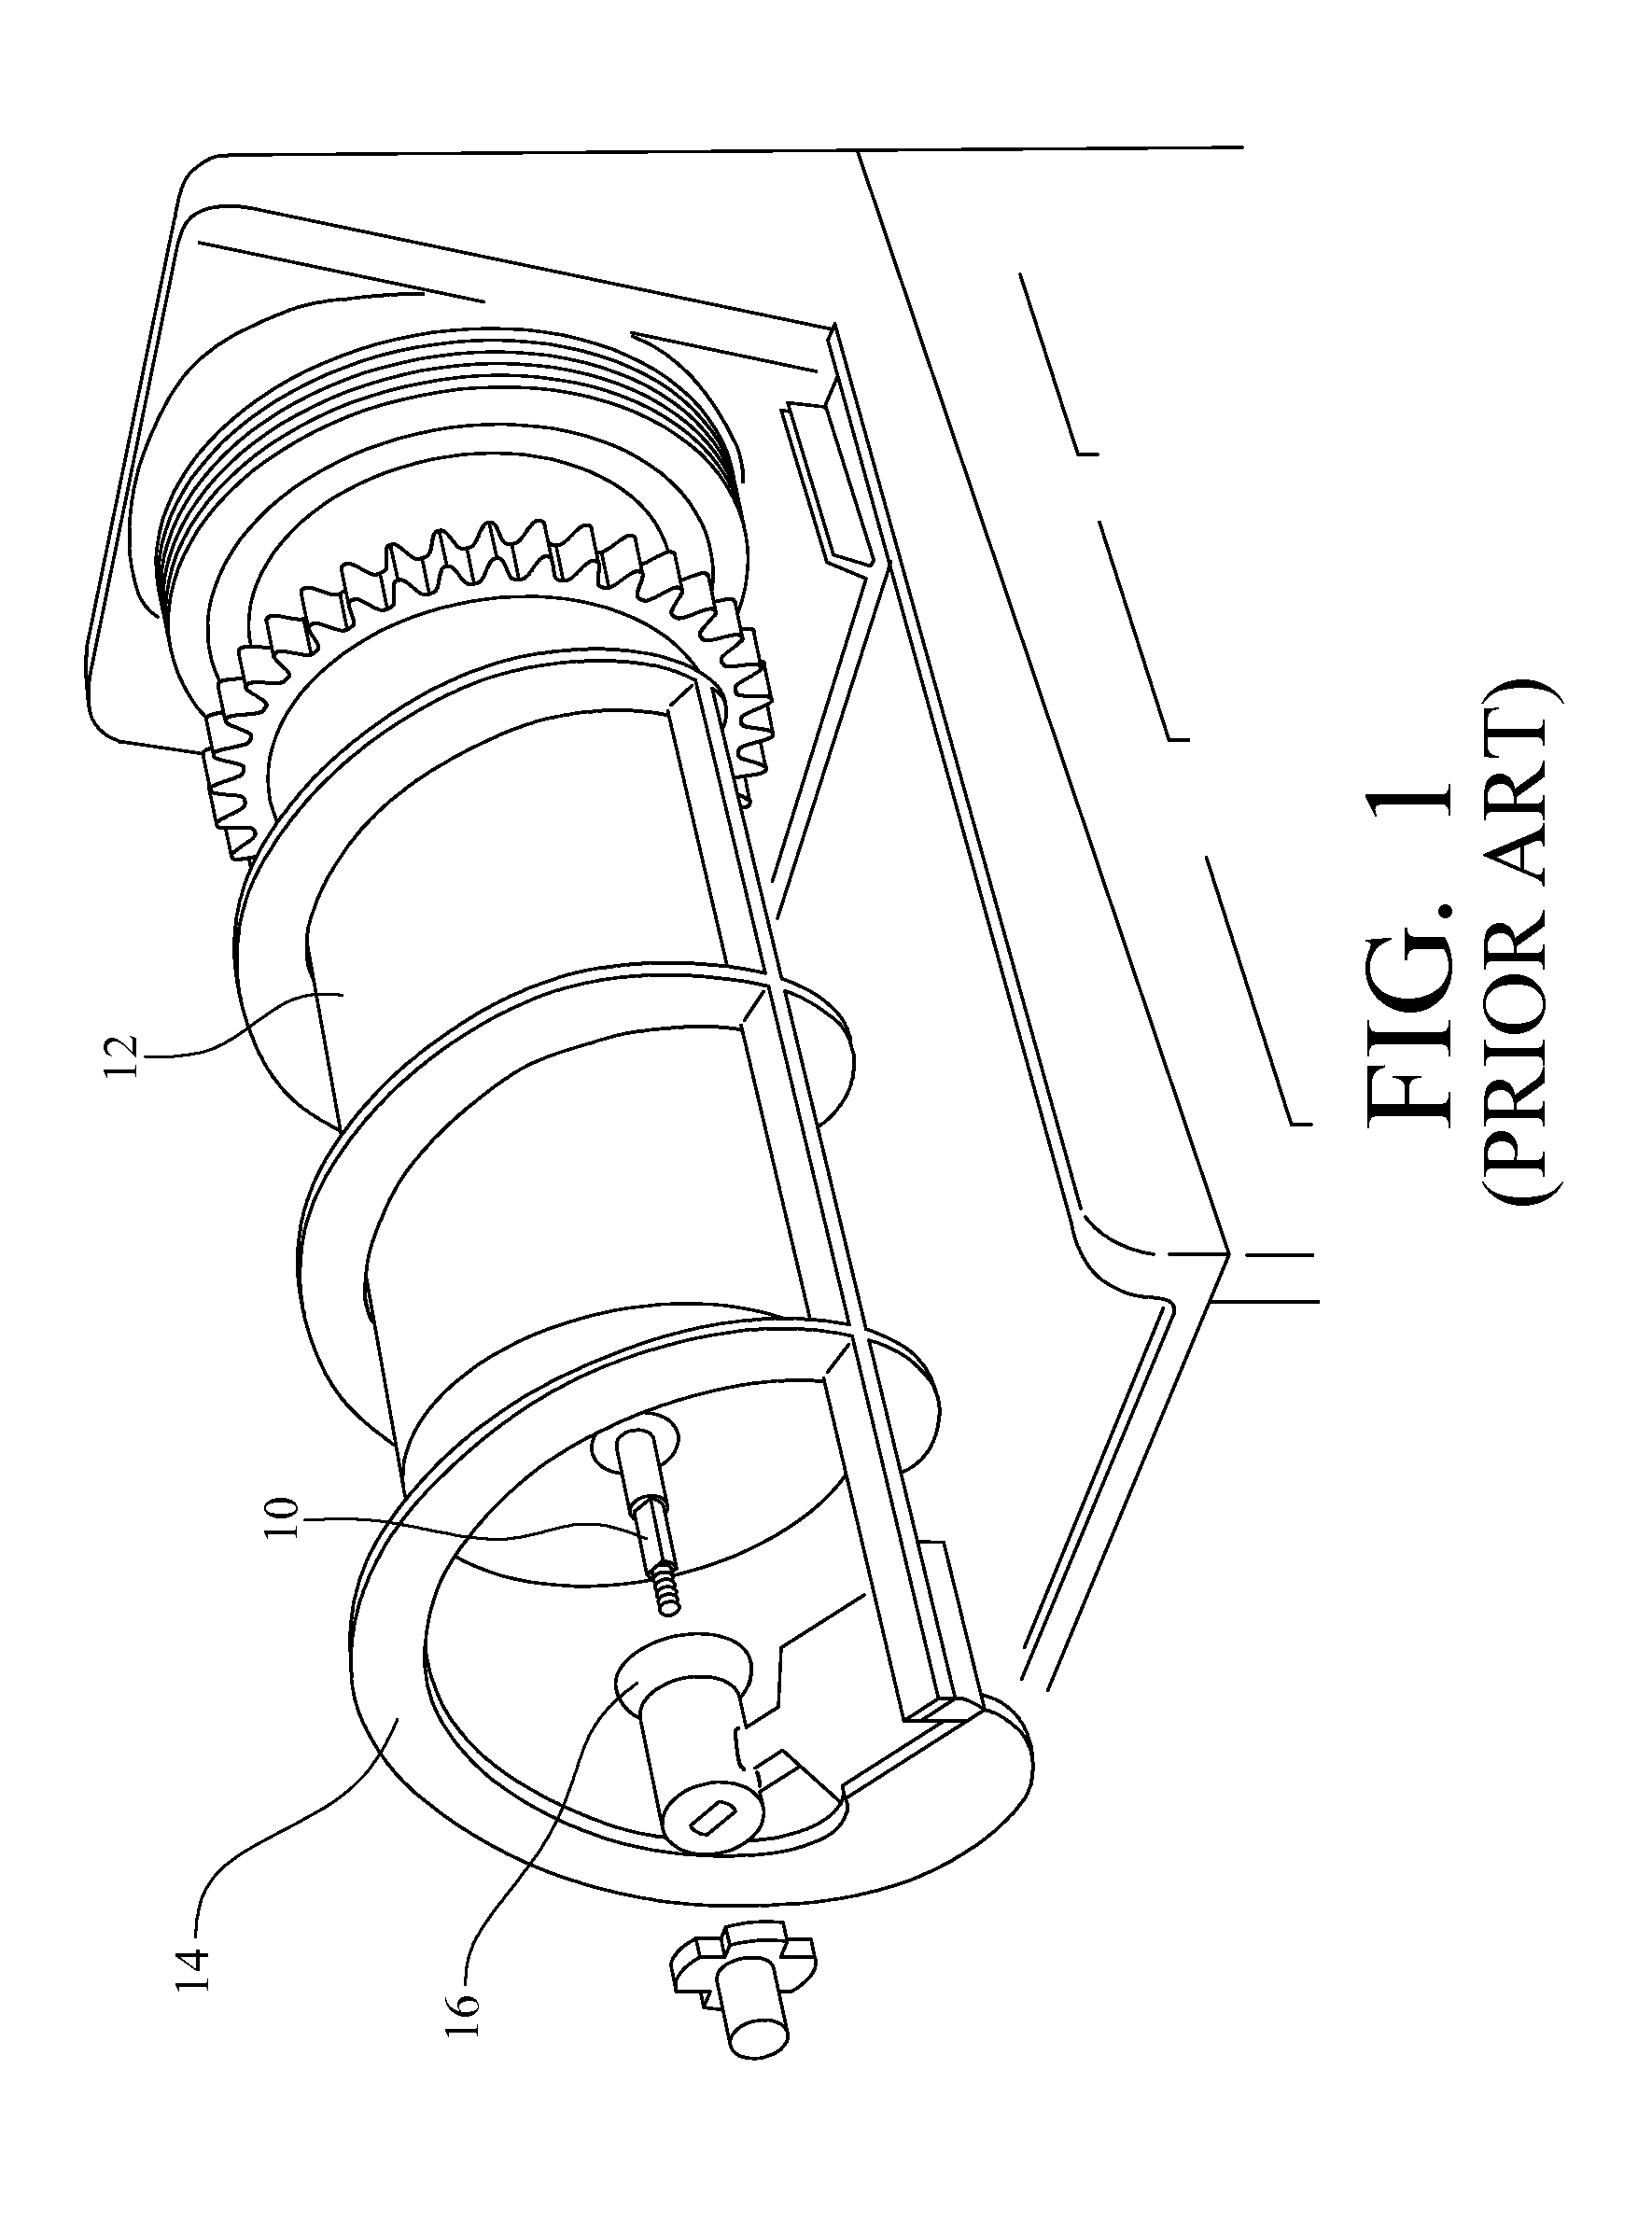 Beverage dispenser for partially frozen beverages with an improved drive and sealing system